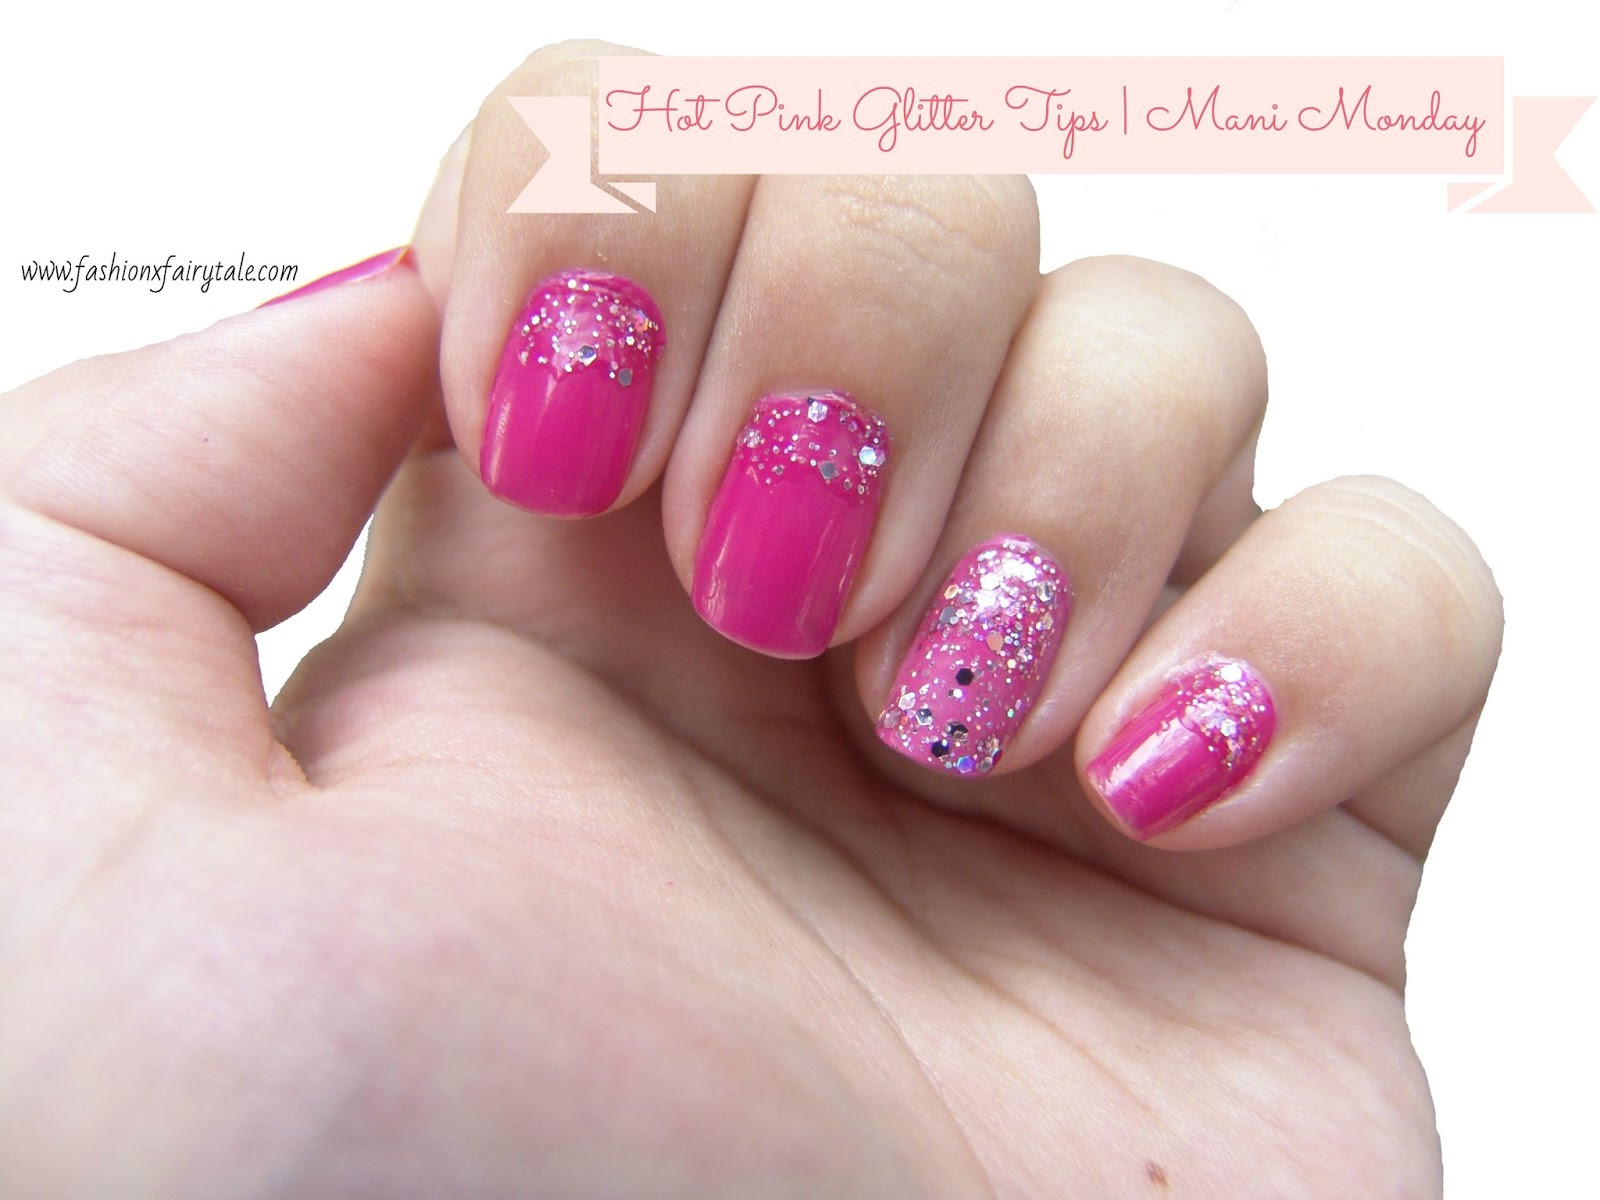 Hot Pink Nails With Glitter
 Hot Pink Glitter Tips